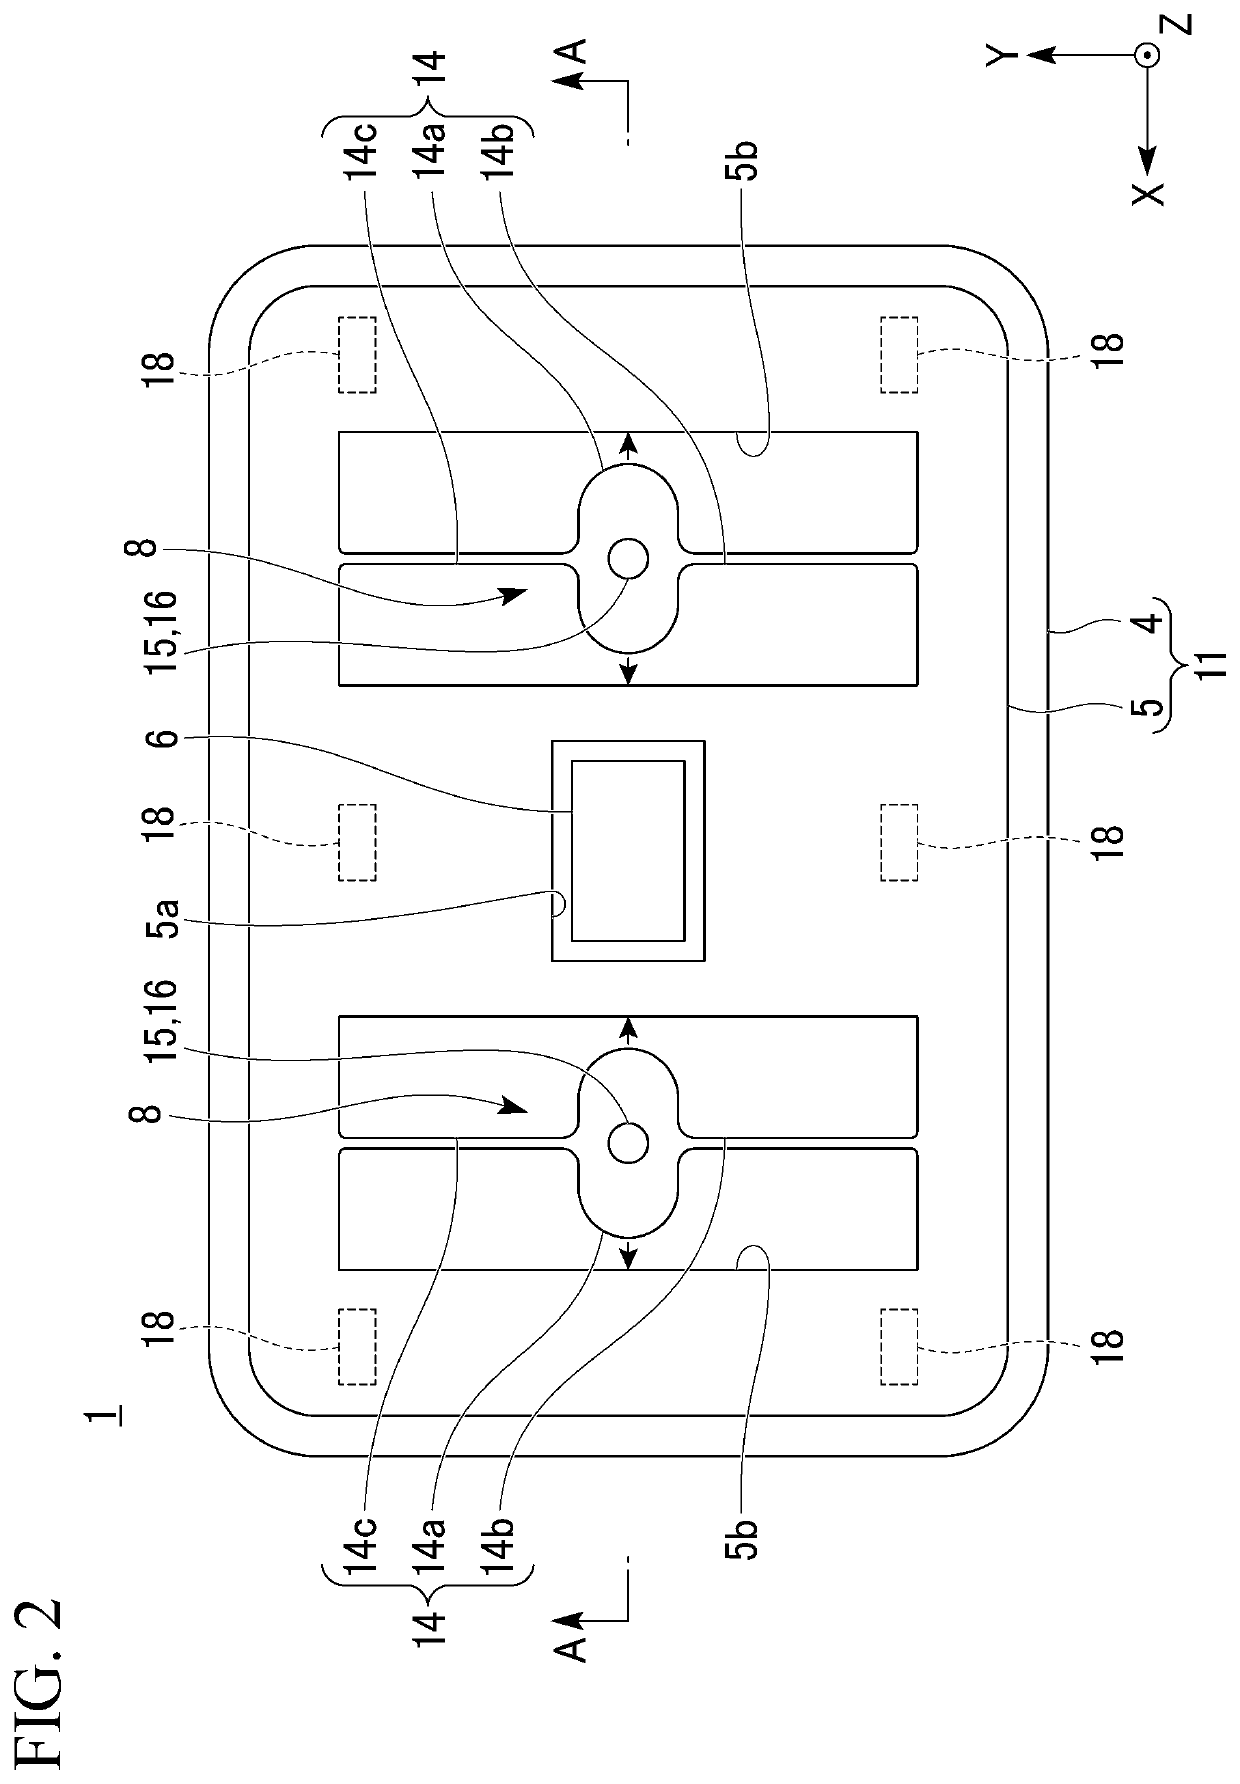 Touch panel-equipped display device